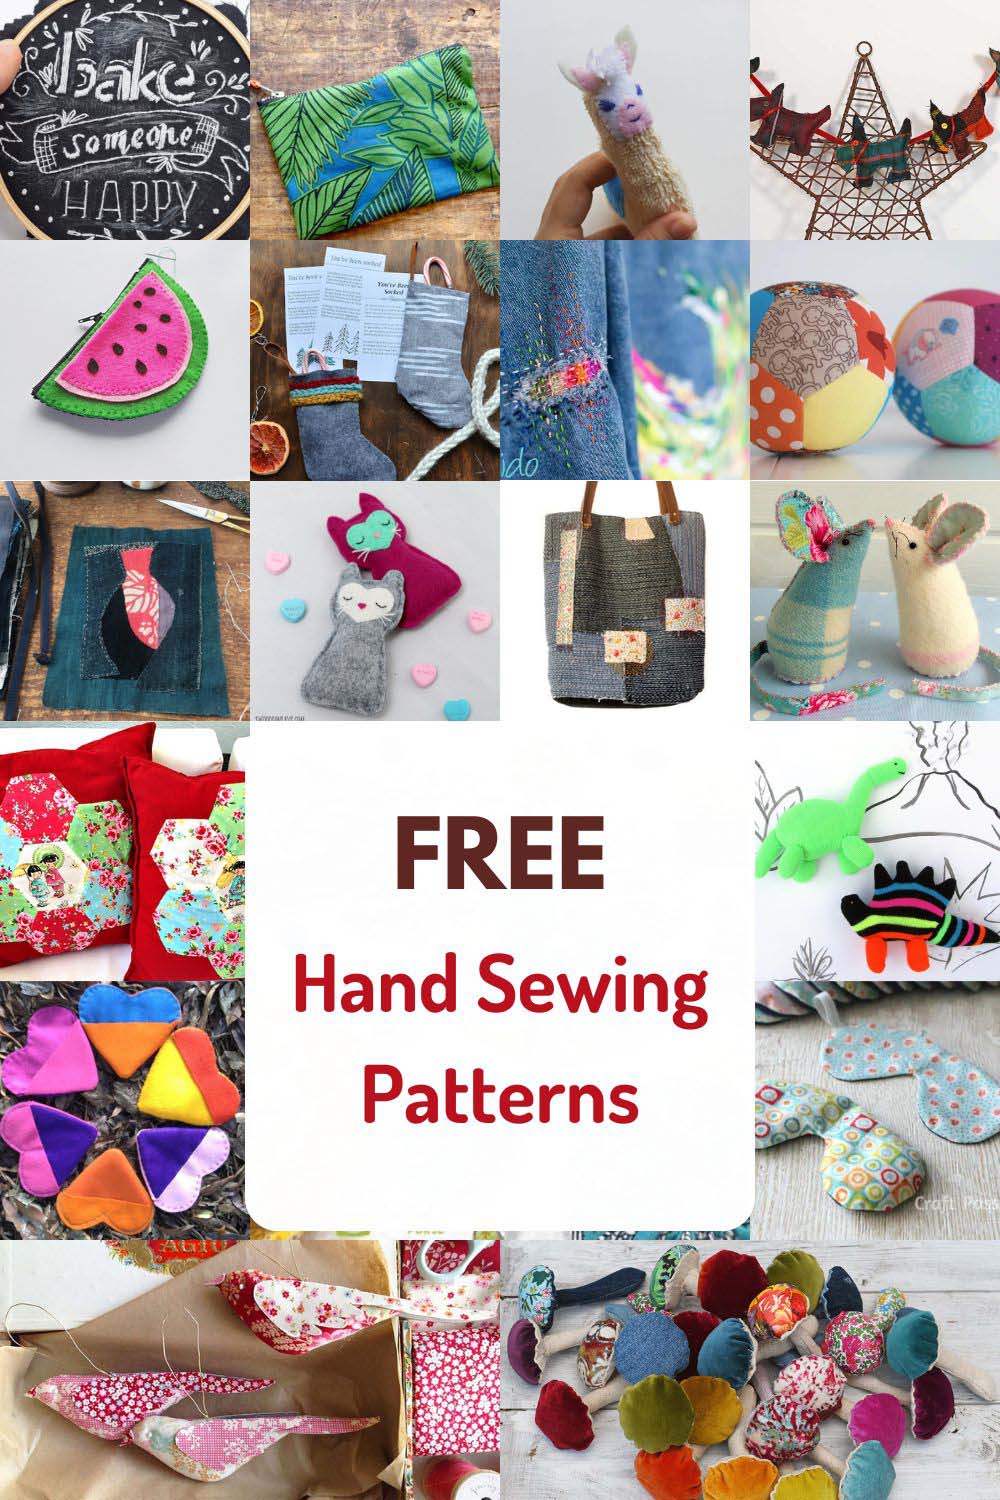 Free hand sewing patterns